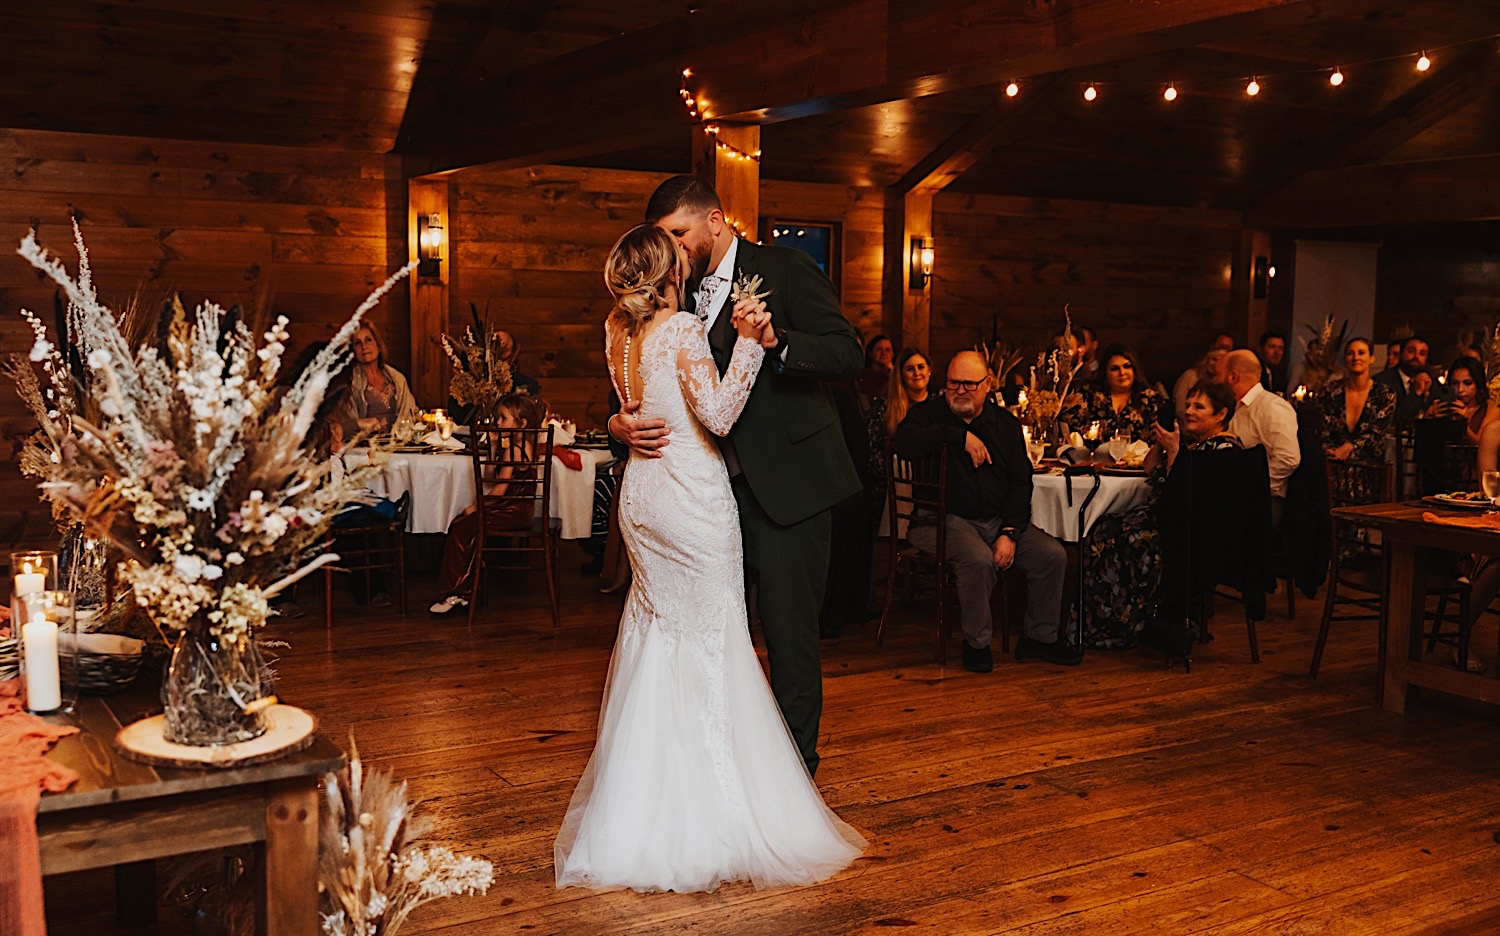 A bride and groom kiss one another while dancing during their indoor wedding reception at Lake Bomoseen Lodge in Vermont